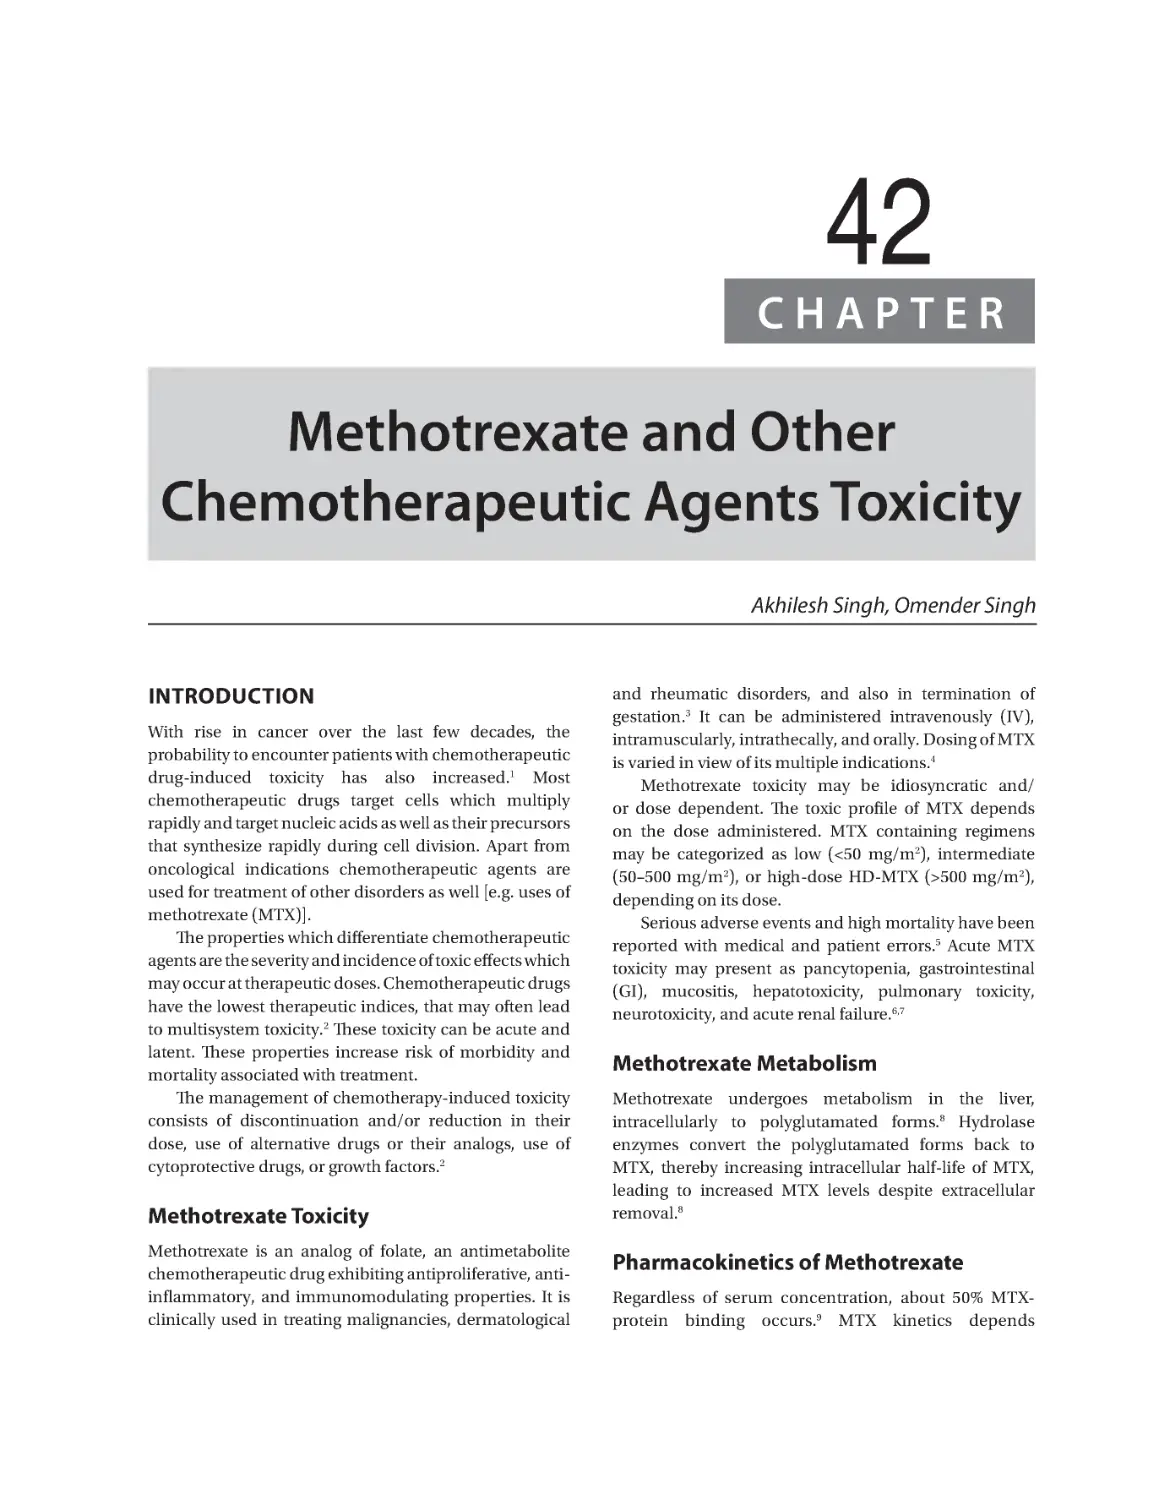 Chapter 42: Methotrexate and Other Chemotherapeutic Agents Toxicity